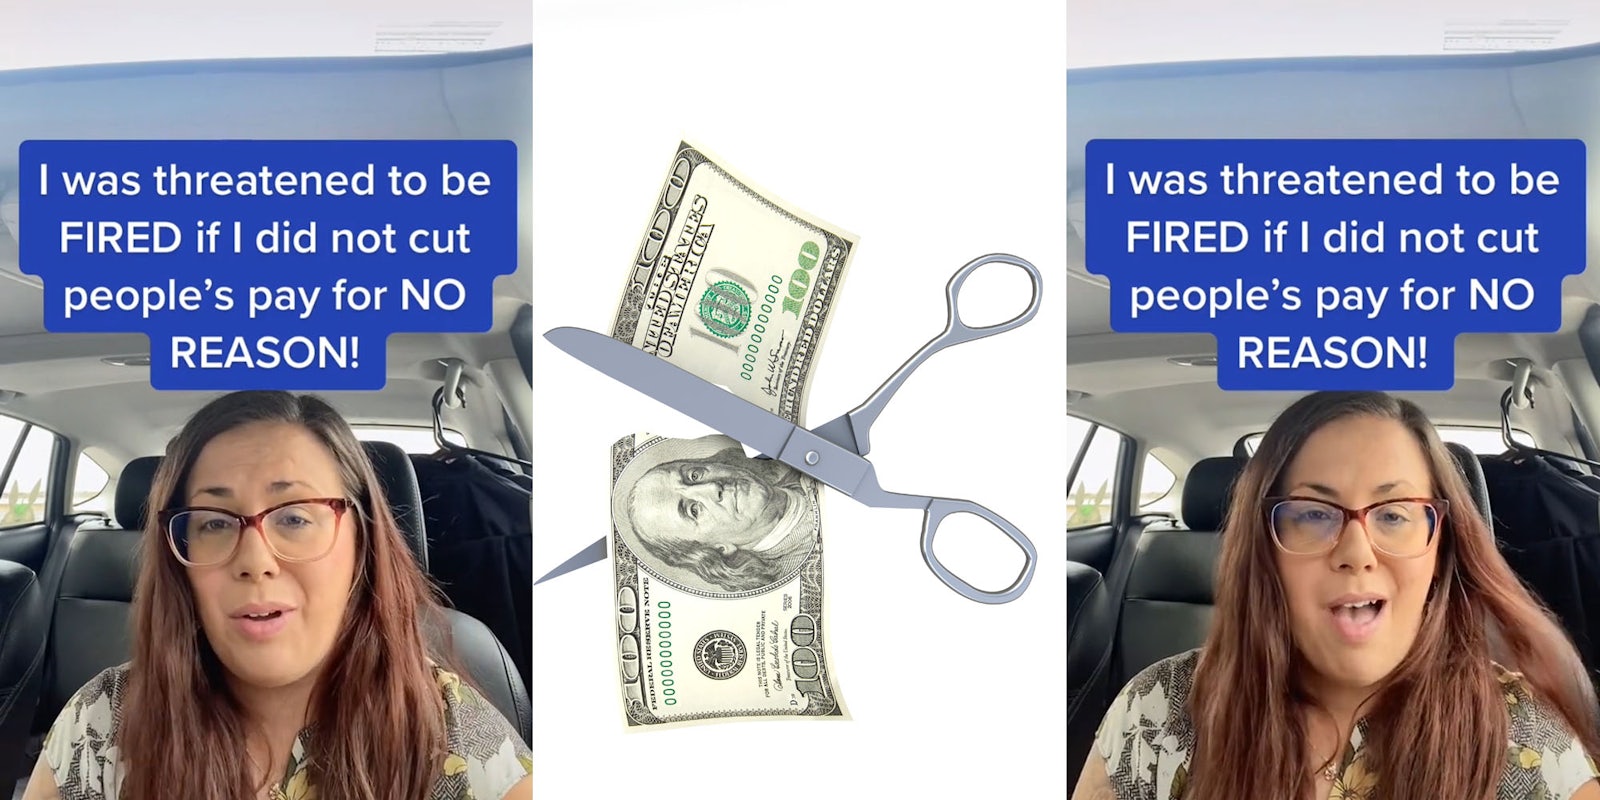 Woman in car speaking caption 'I was threatoned to be FIRED if I did not cut people's pay for NO REASON!' (l) Scissors cutting 100 dollar bill in half on white background (c) woman in car speaking caption 'I was threatened to be FIRED if I did not cut people's pay for NO REASON!' (r)